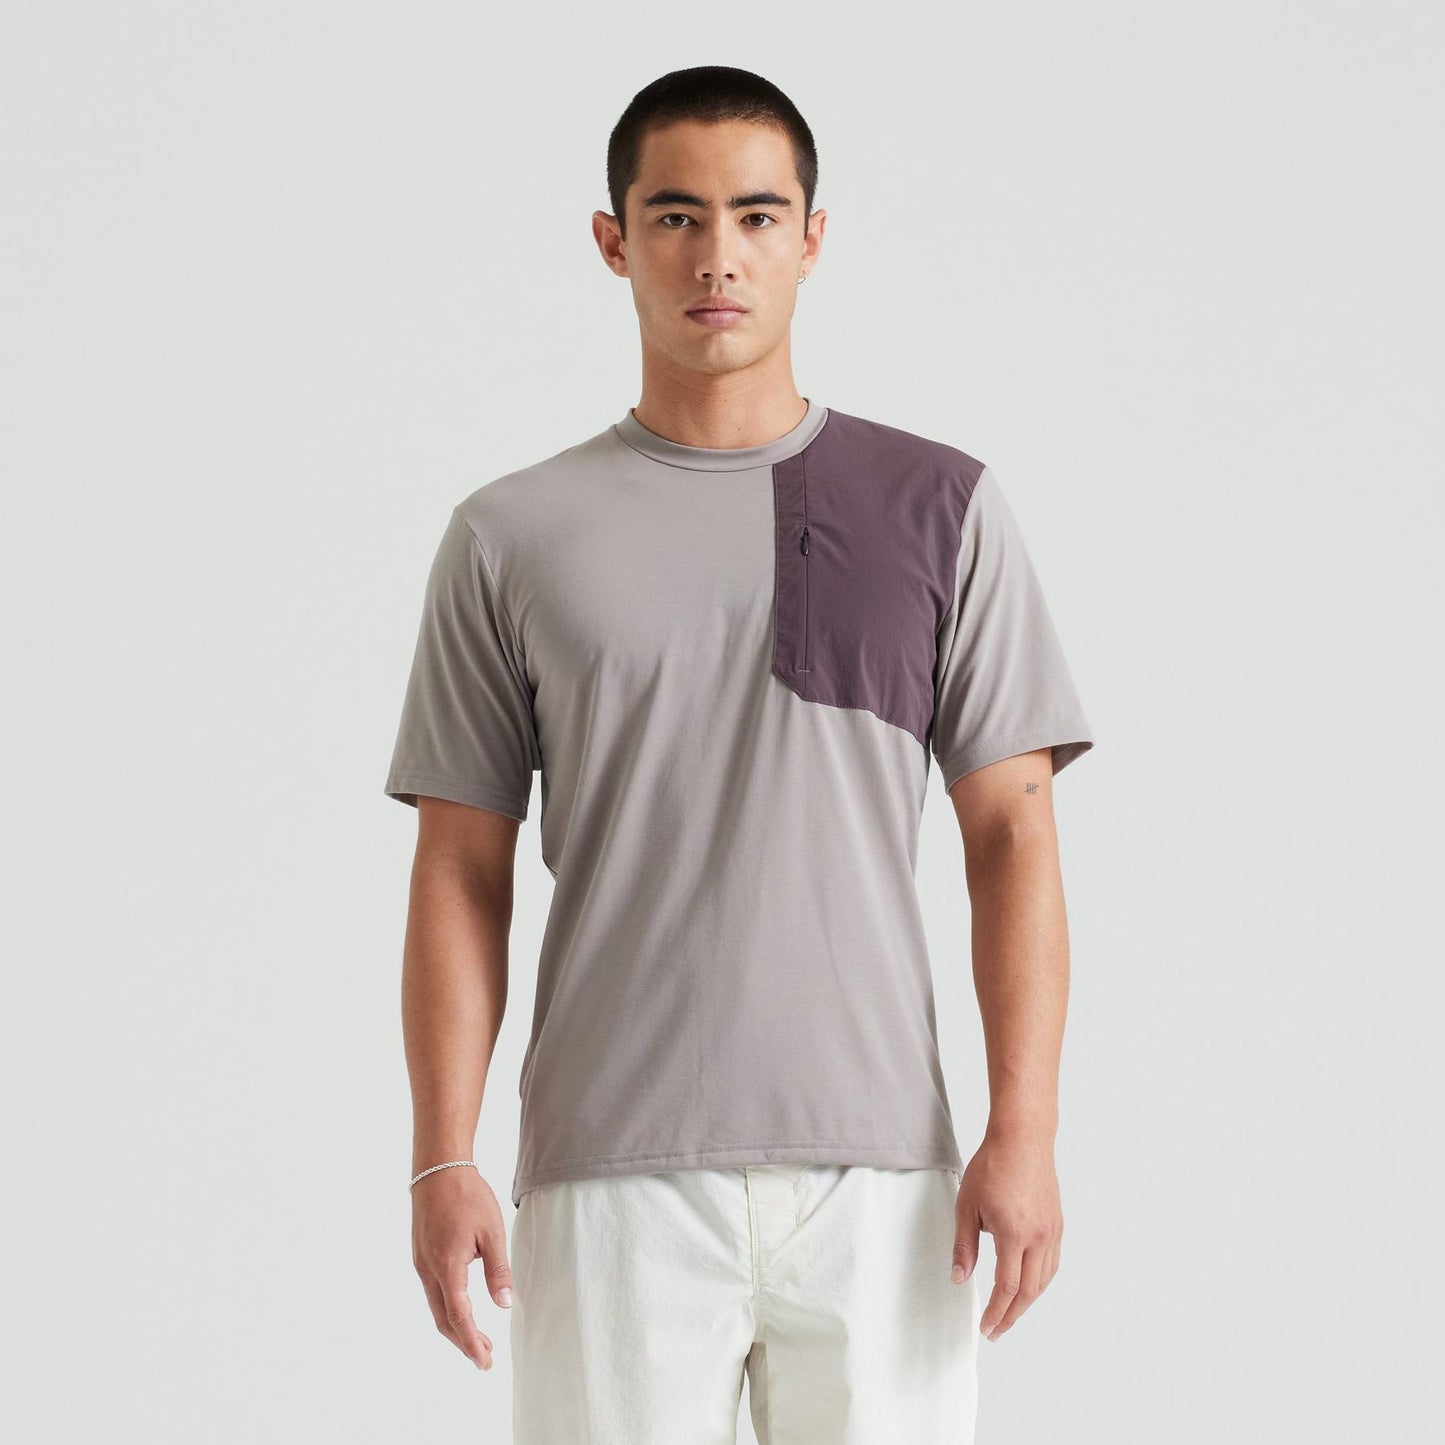 Men's ADV Air Short Sleeve Jersey in Taupe